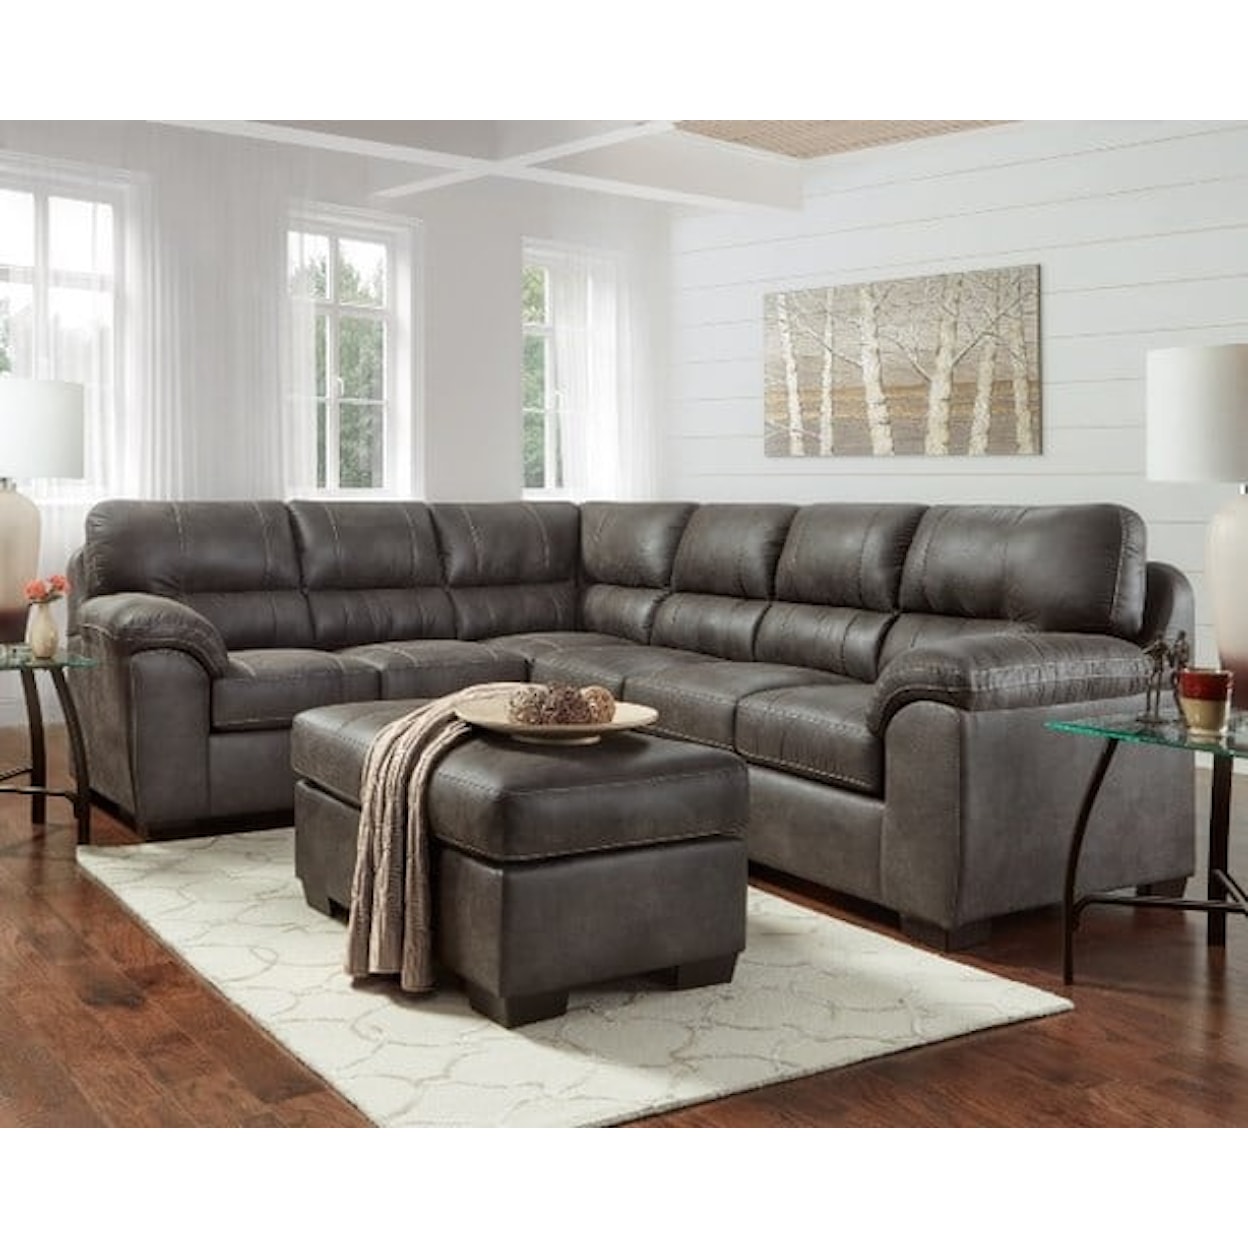 Affordable Furniture Sycamore SYCAMORE 2 PC SECTIONAL |